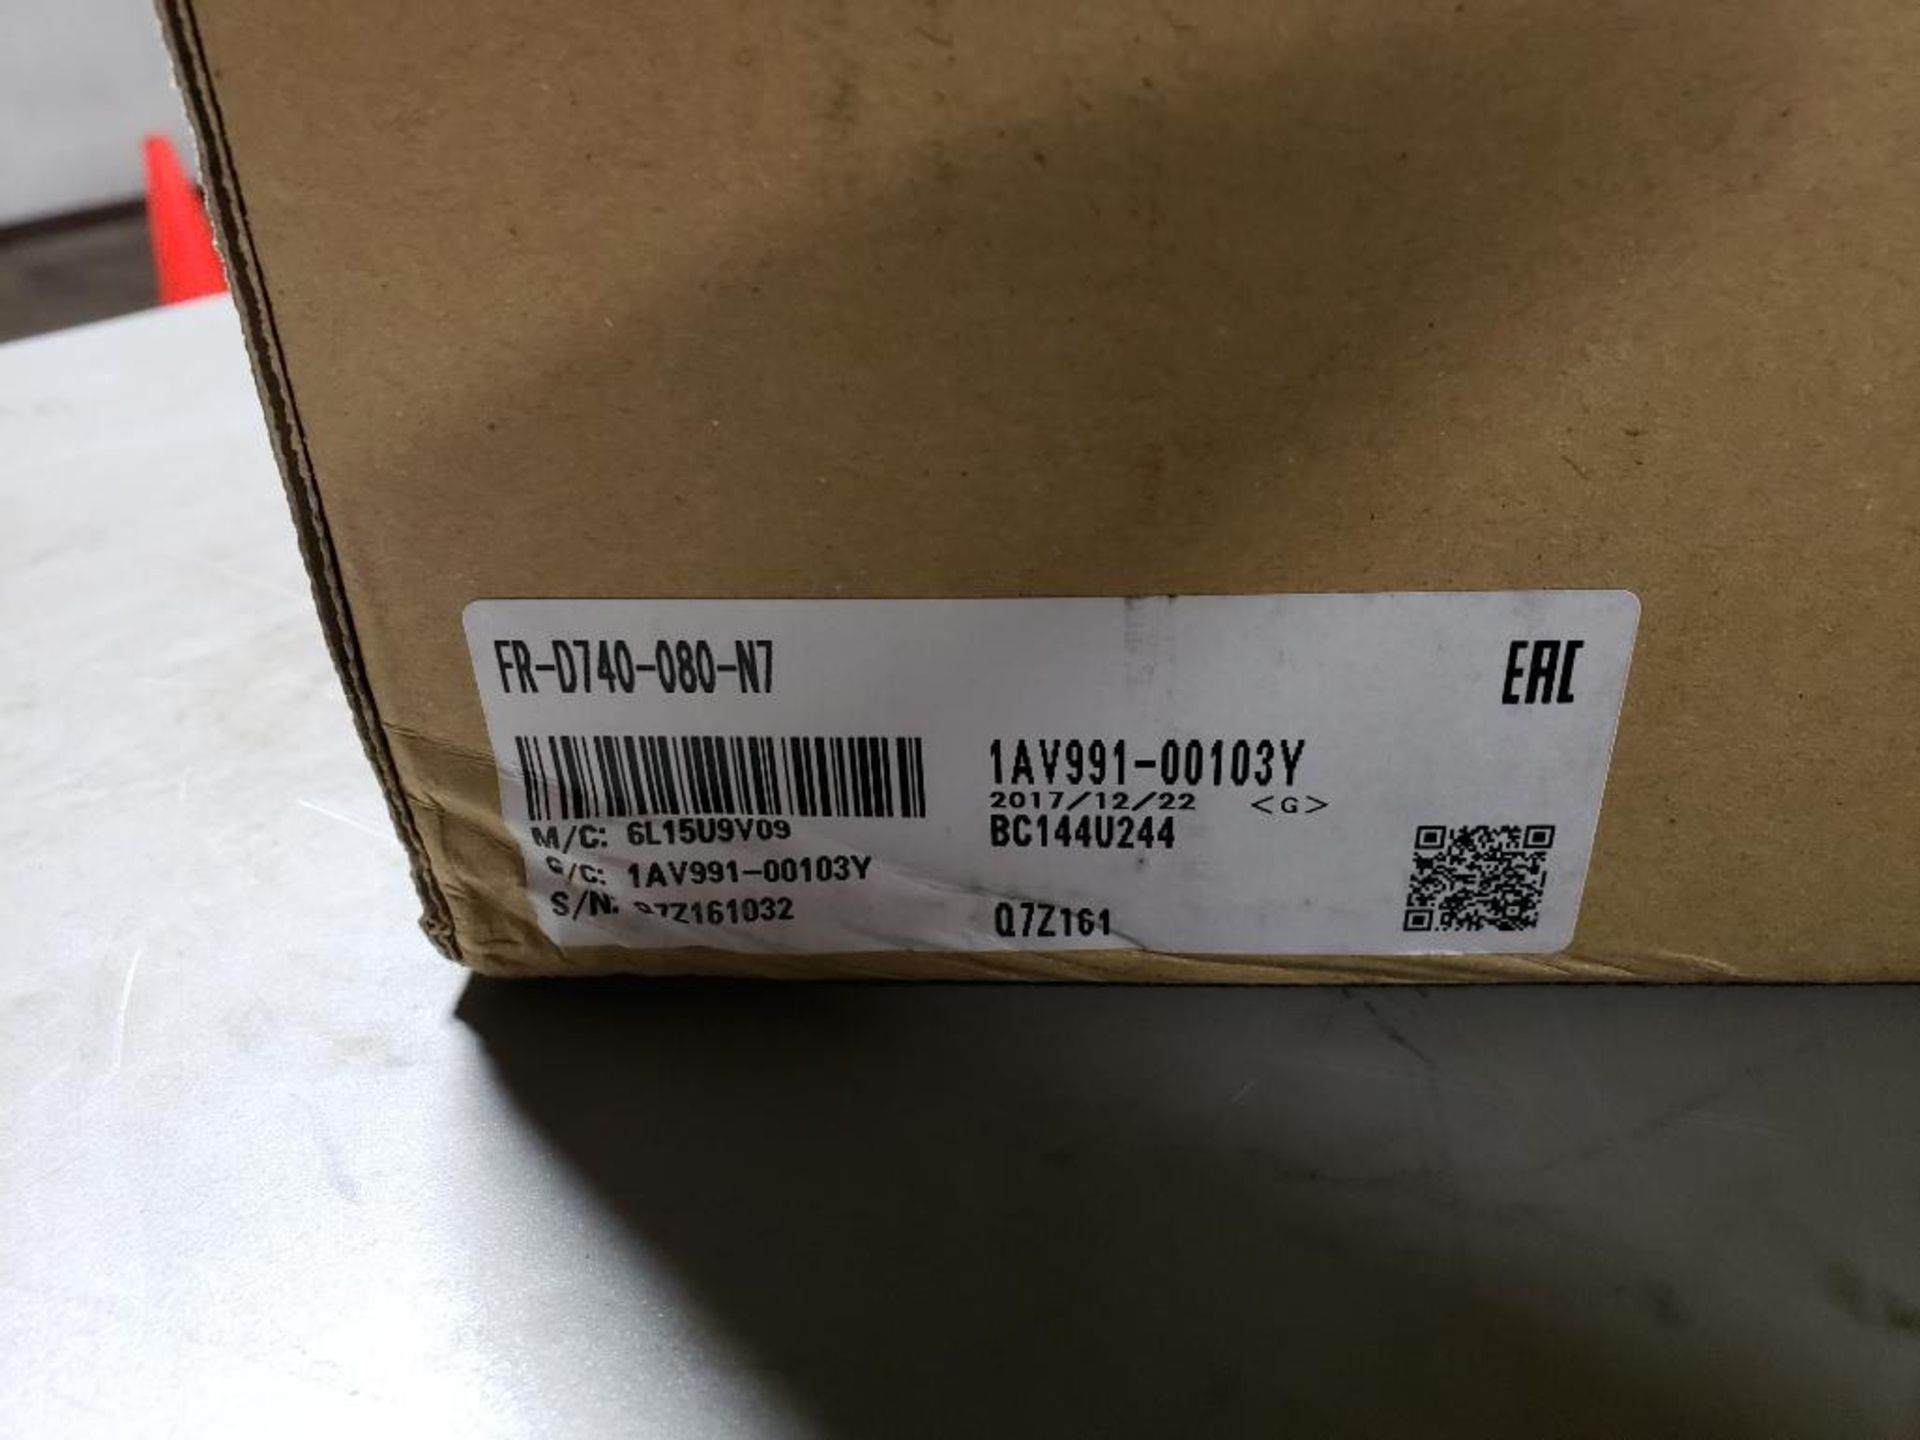 Mitsubishi inverter drive. Part number FR-D740-080-N7. New in box. - Image 4 of 5